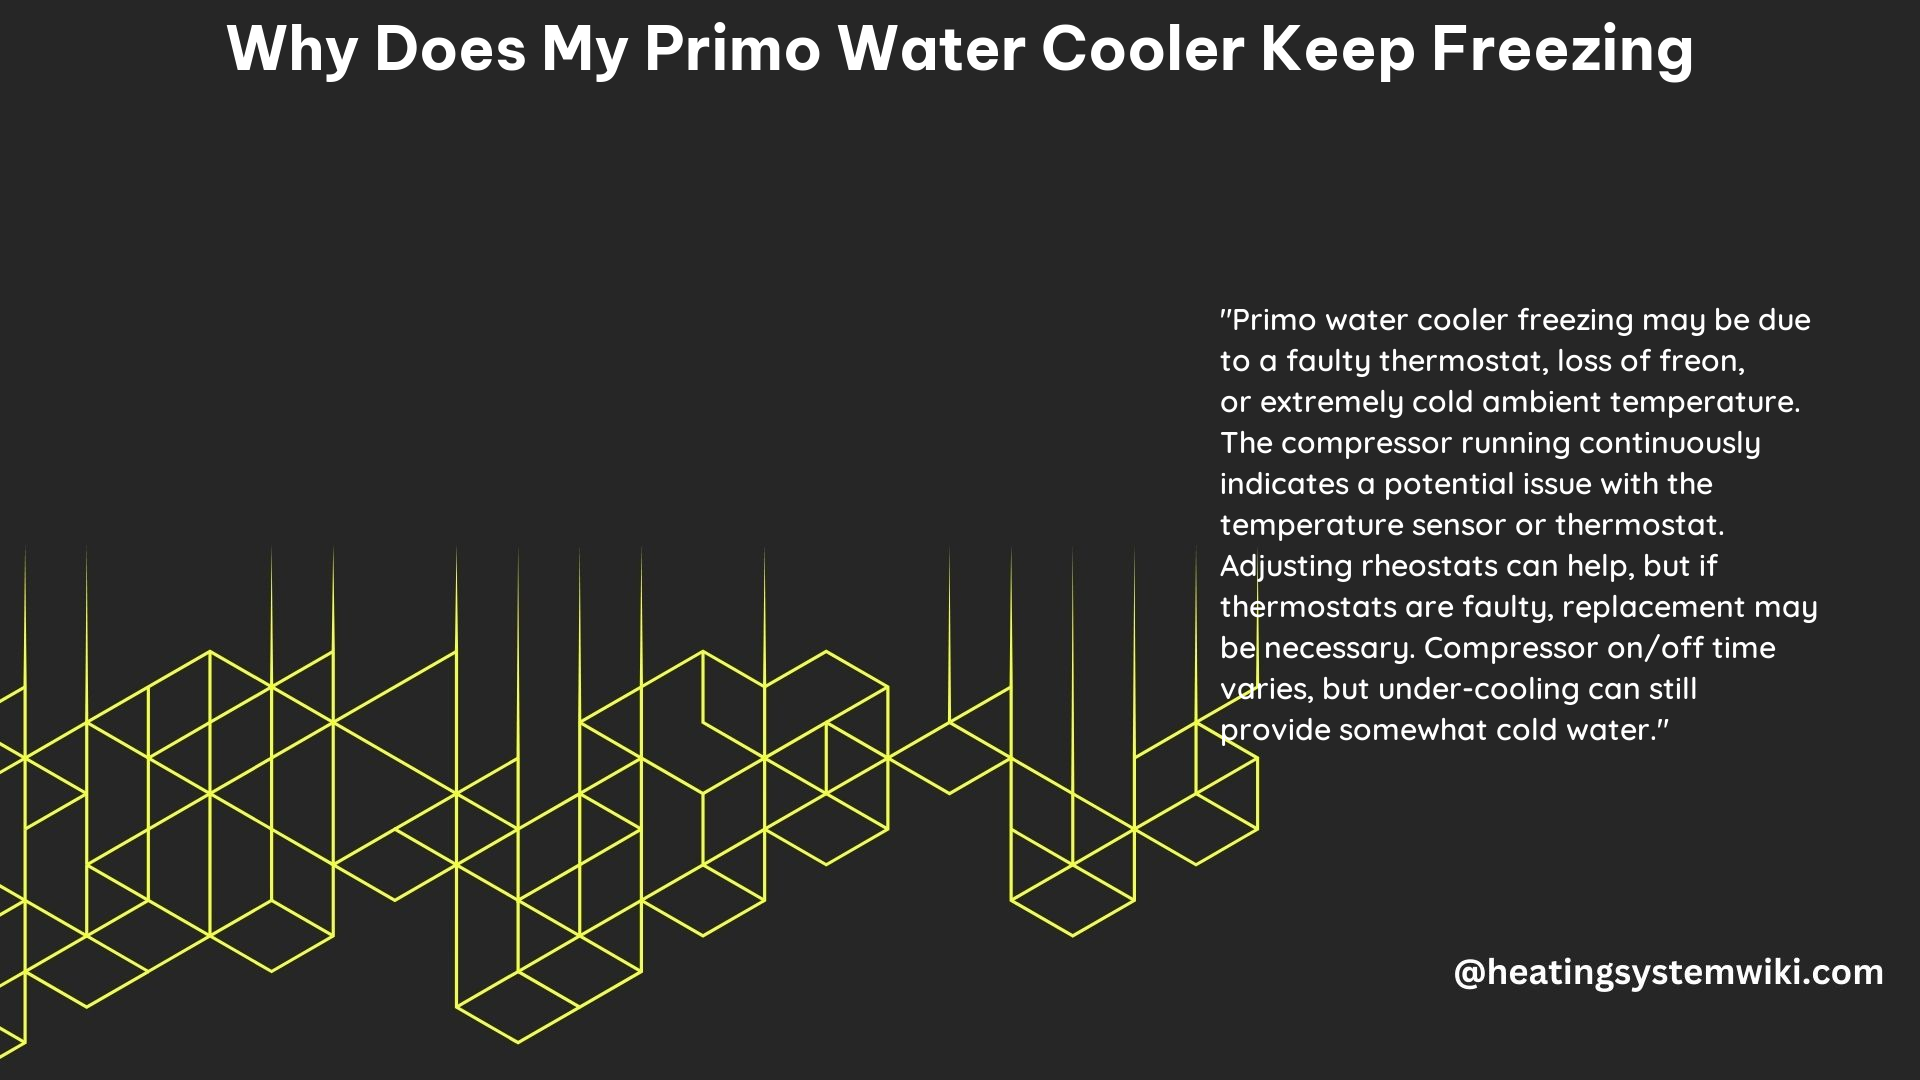 Why Does My Primo Water Cooler Keep Freezing